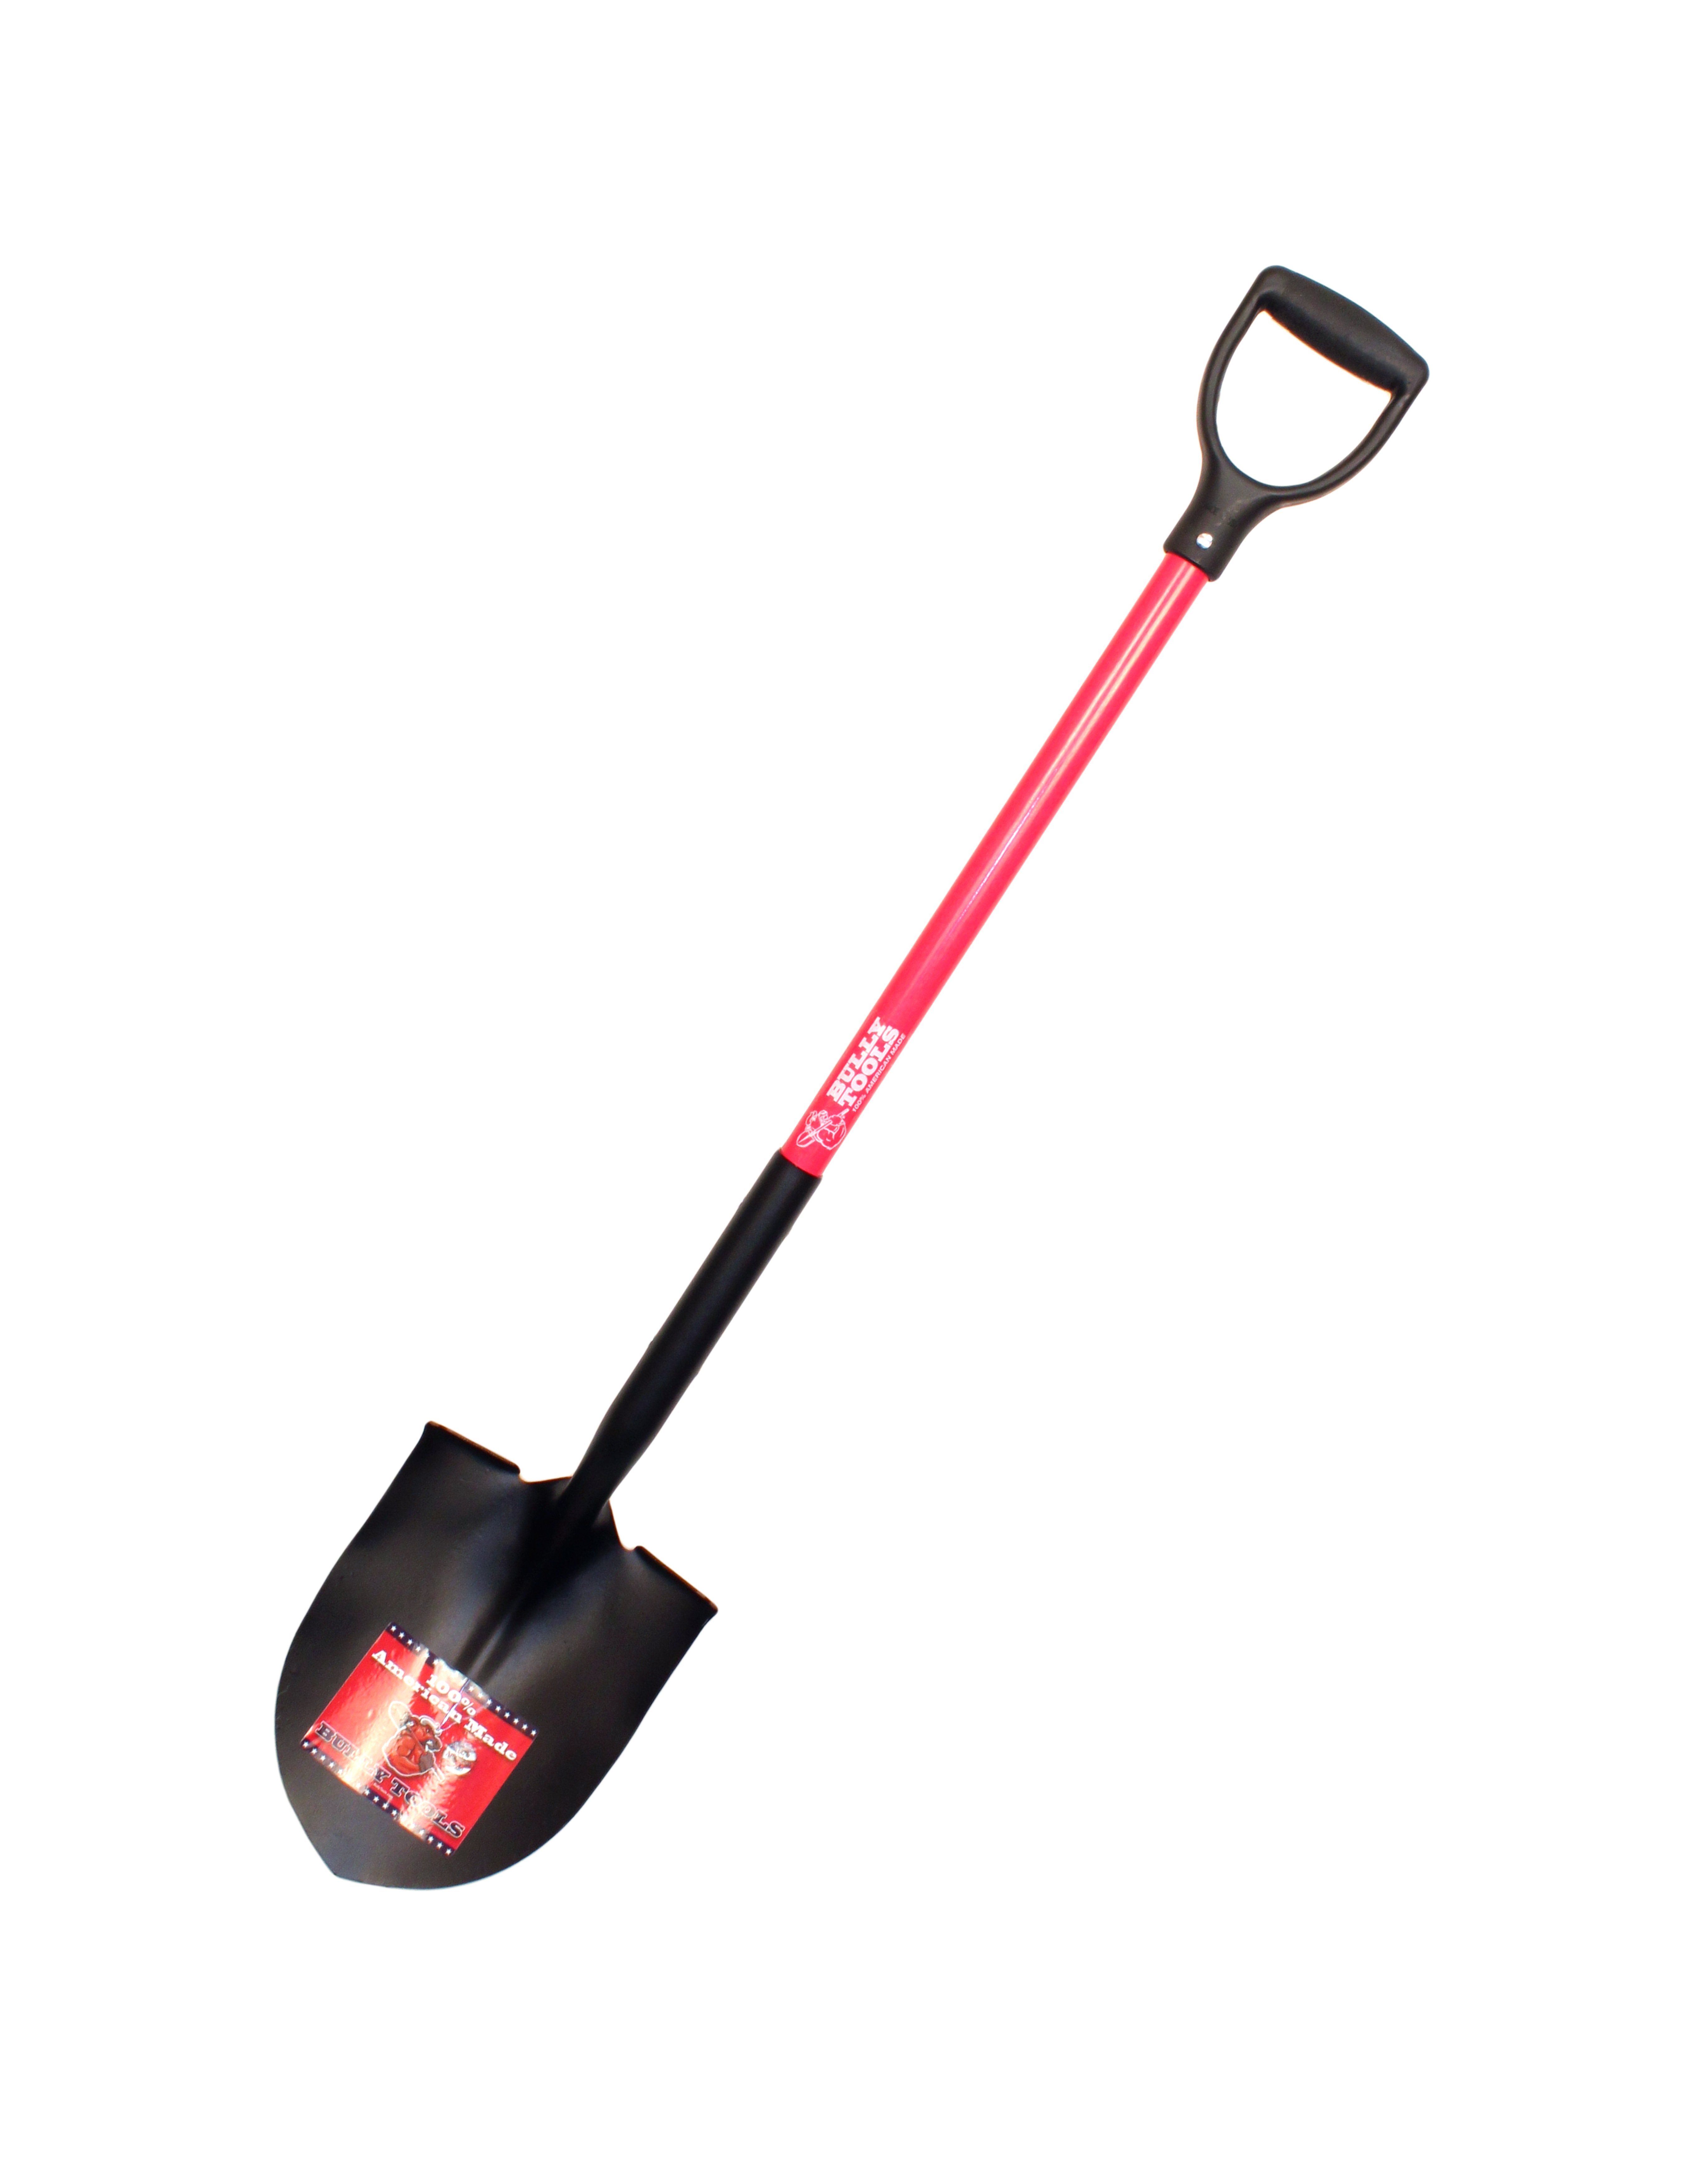 Bully Tools 14-Gauge Round Point Shovel with Fiberglass D-grip Handle - 62510